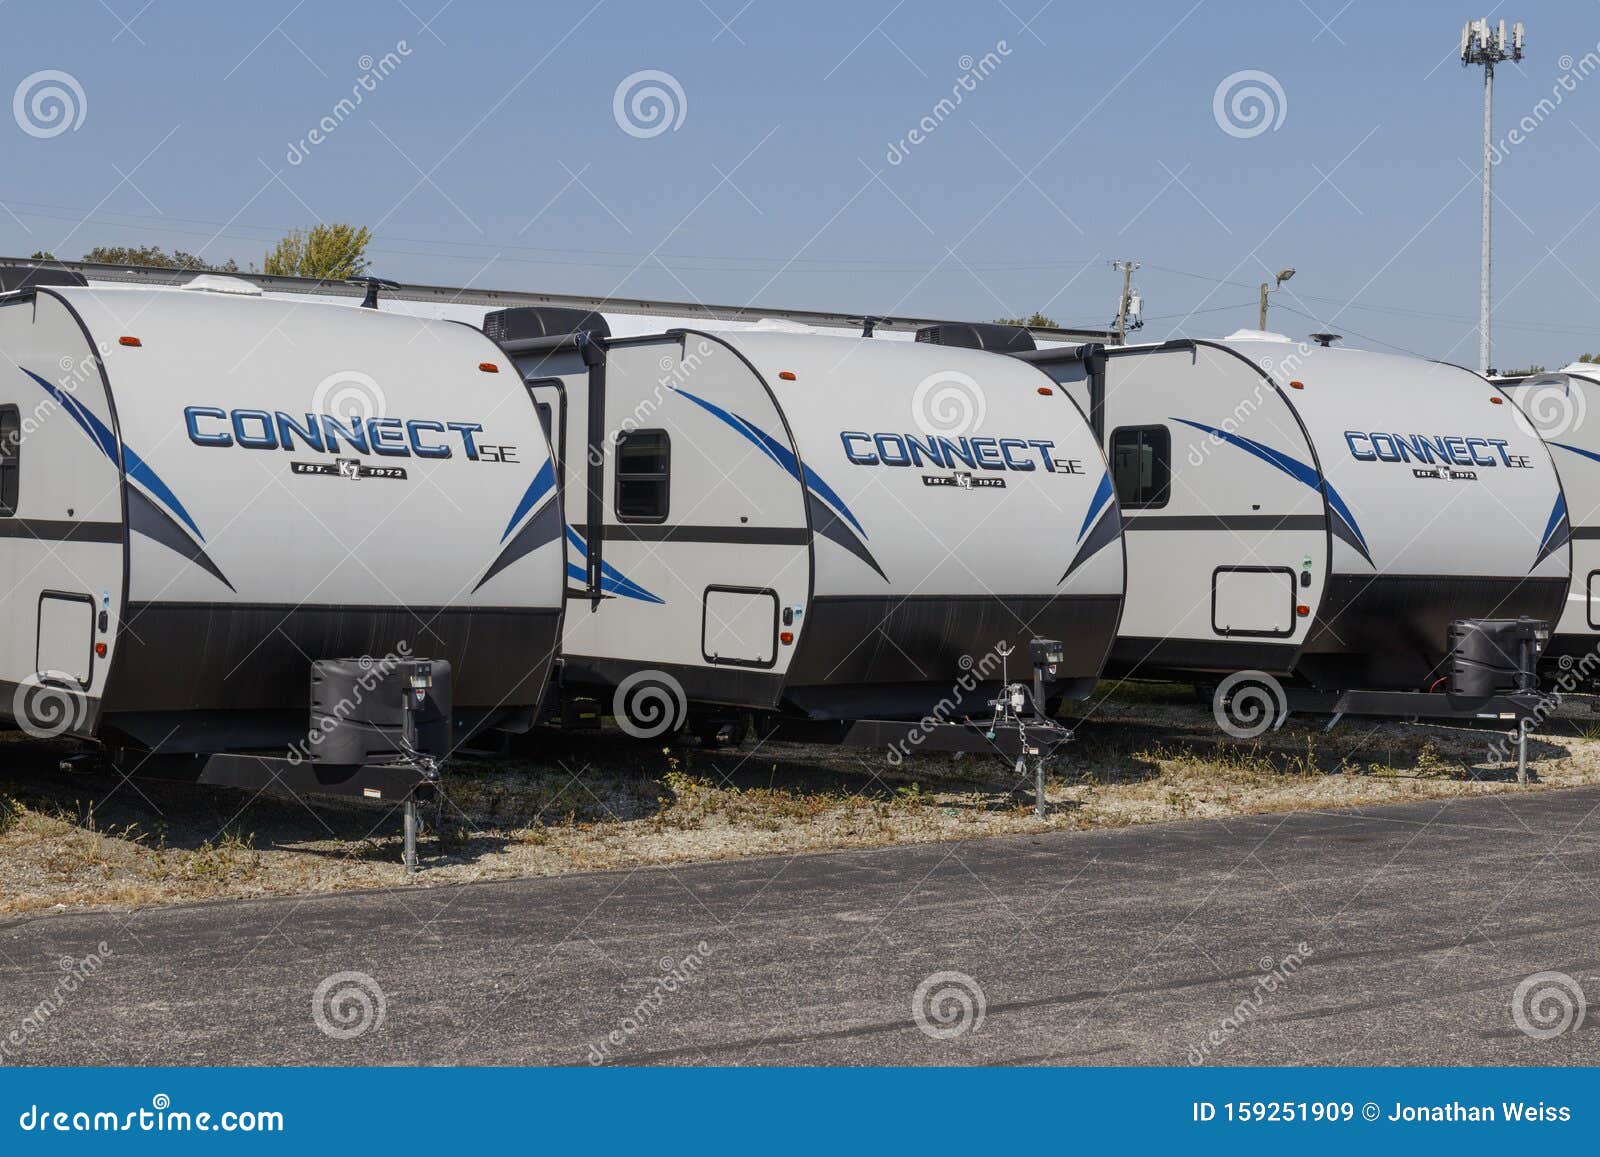 Connect Lightweight Travel Trailers By KZ For Sale. KZ Is